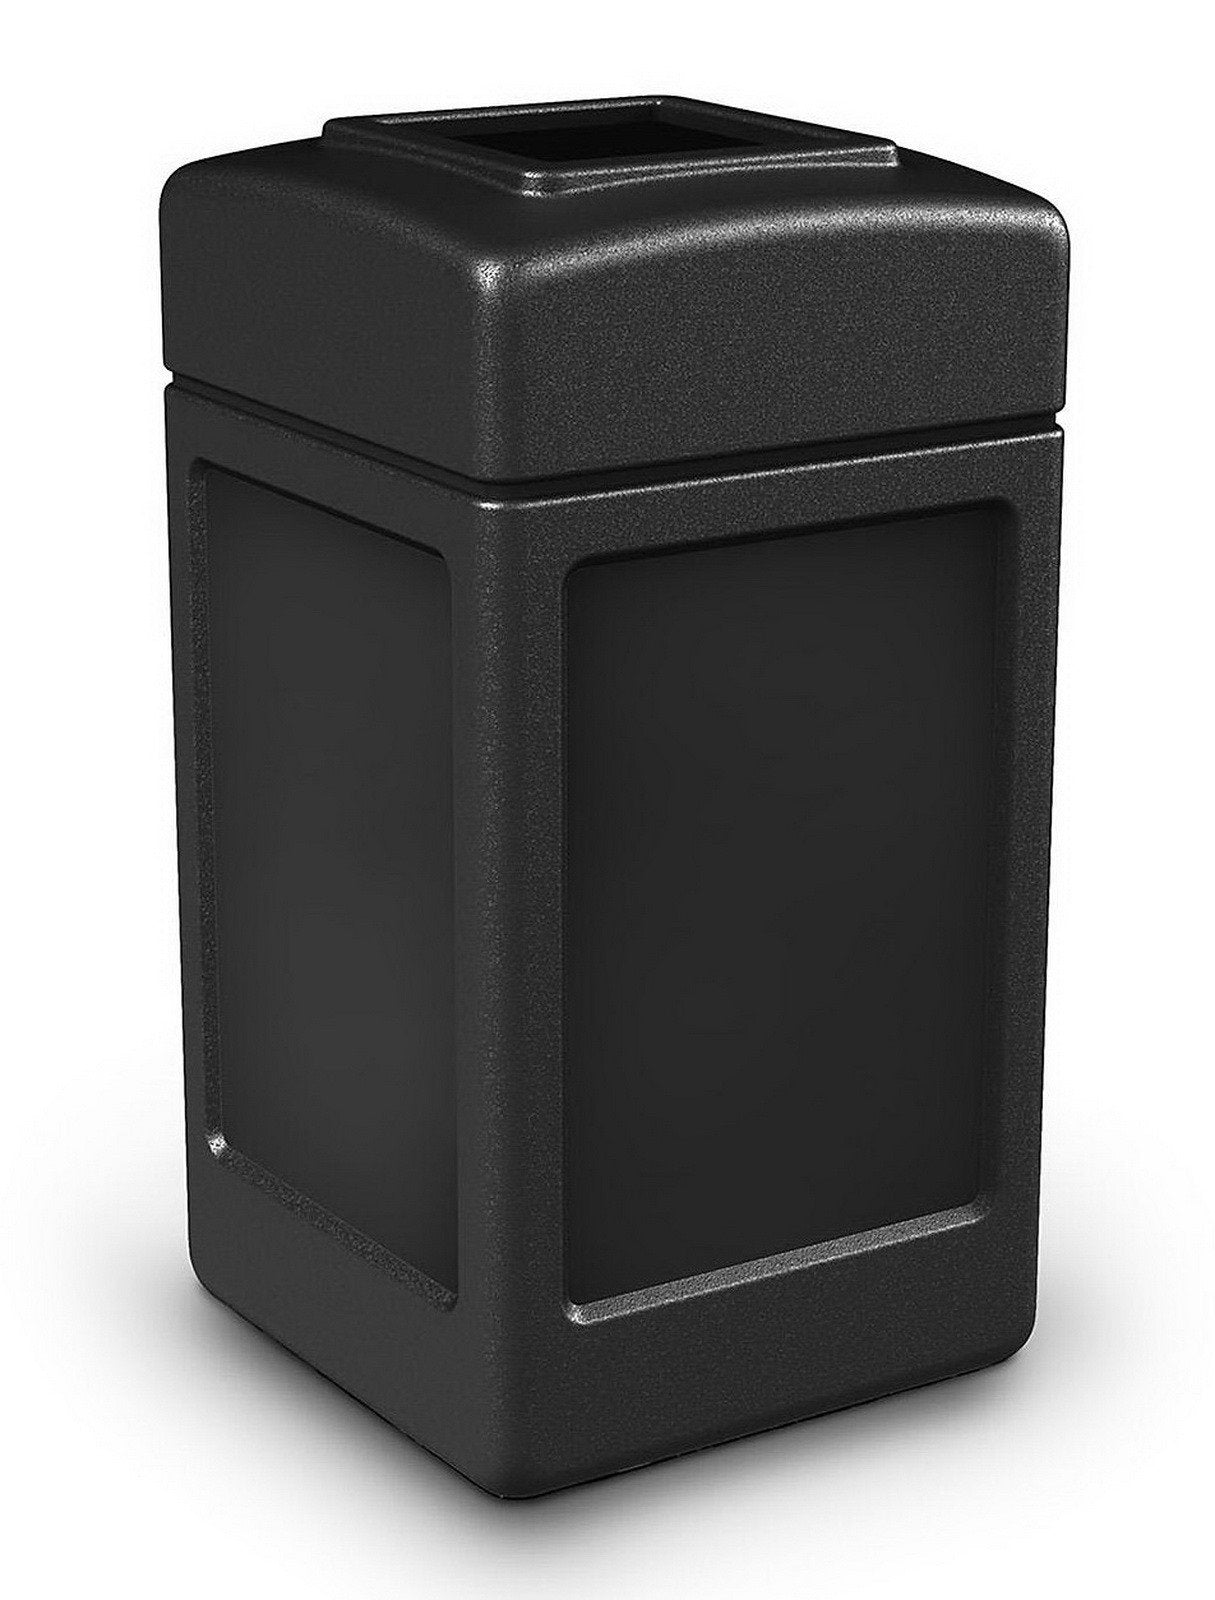 Commercial Outdoor Trash Can Large 42 Gallon Site Lot Garbage Waste Container